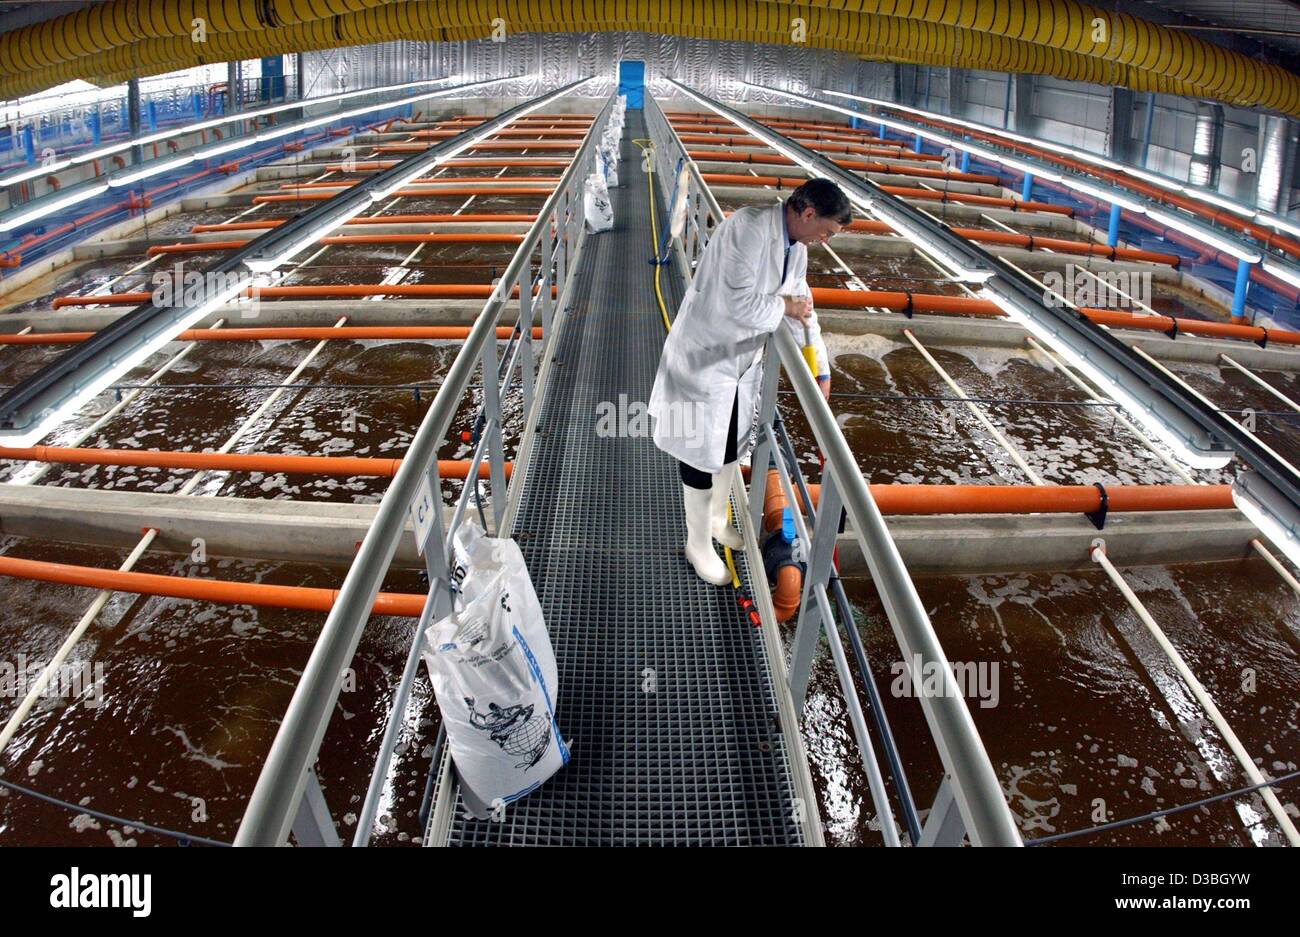 (dpa) - Burkhard Klein checks the water quality in the basins of the shrimp breeding station Josa in Schlotheim, Germany, 30 April 2003. The company breeds tropical shrimp and prawn in a saltwater circuit. Currently there are 2.5 million animals growing in 27 basins. The shrimps grow to a size of up Stock Photo